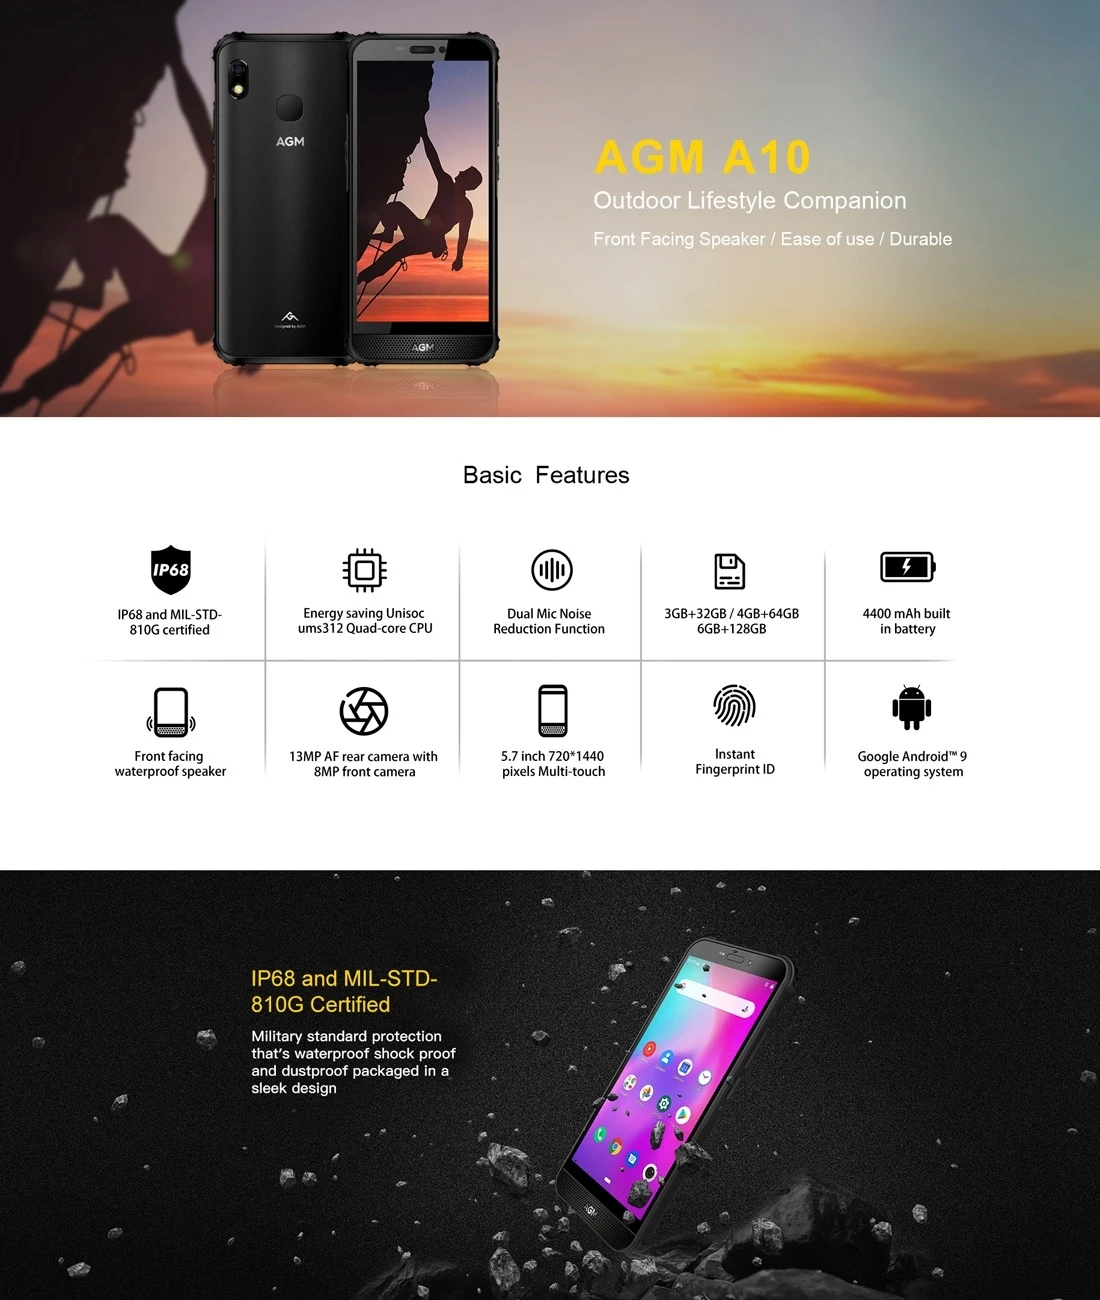 agm a10 rugged phone android 9 smartphone 5 7 screen unisoc ums312 nfc 6gb128gb rear camera 13mp fingerprint 4400mah cellphone free global shipping